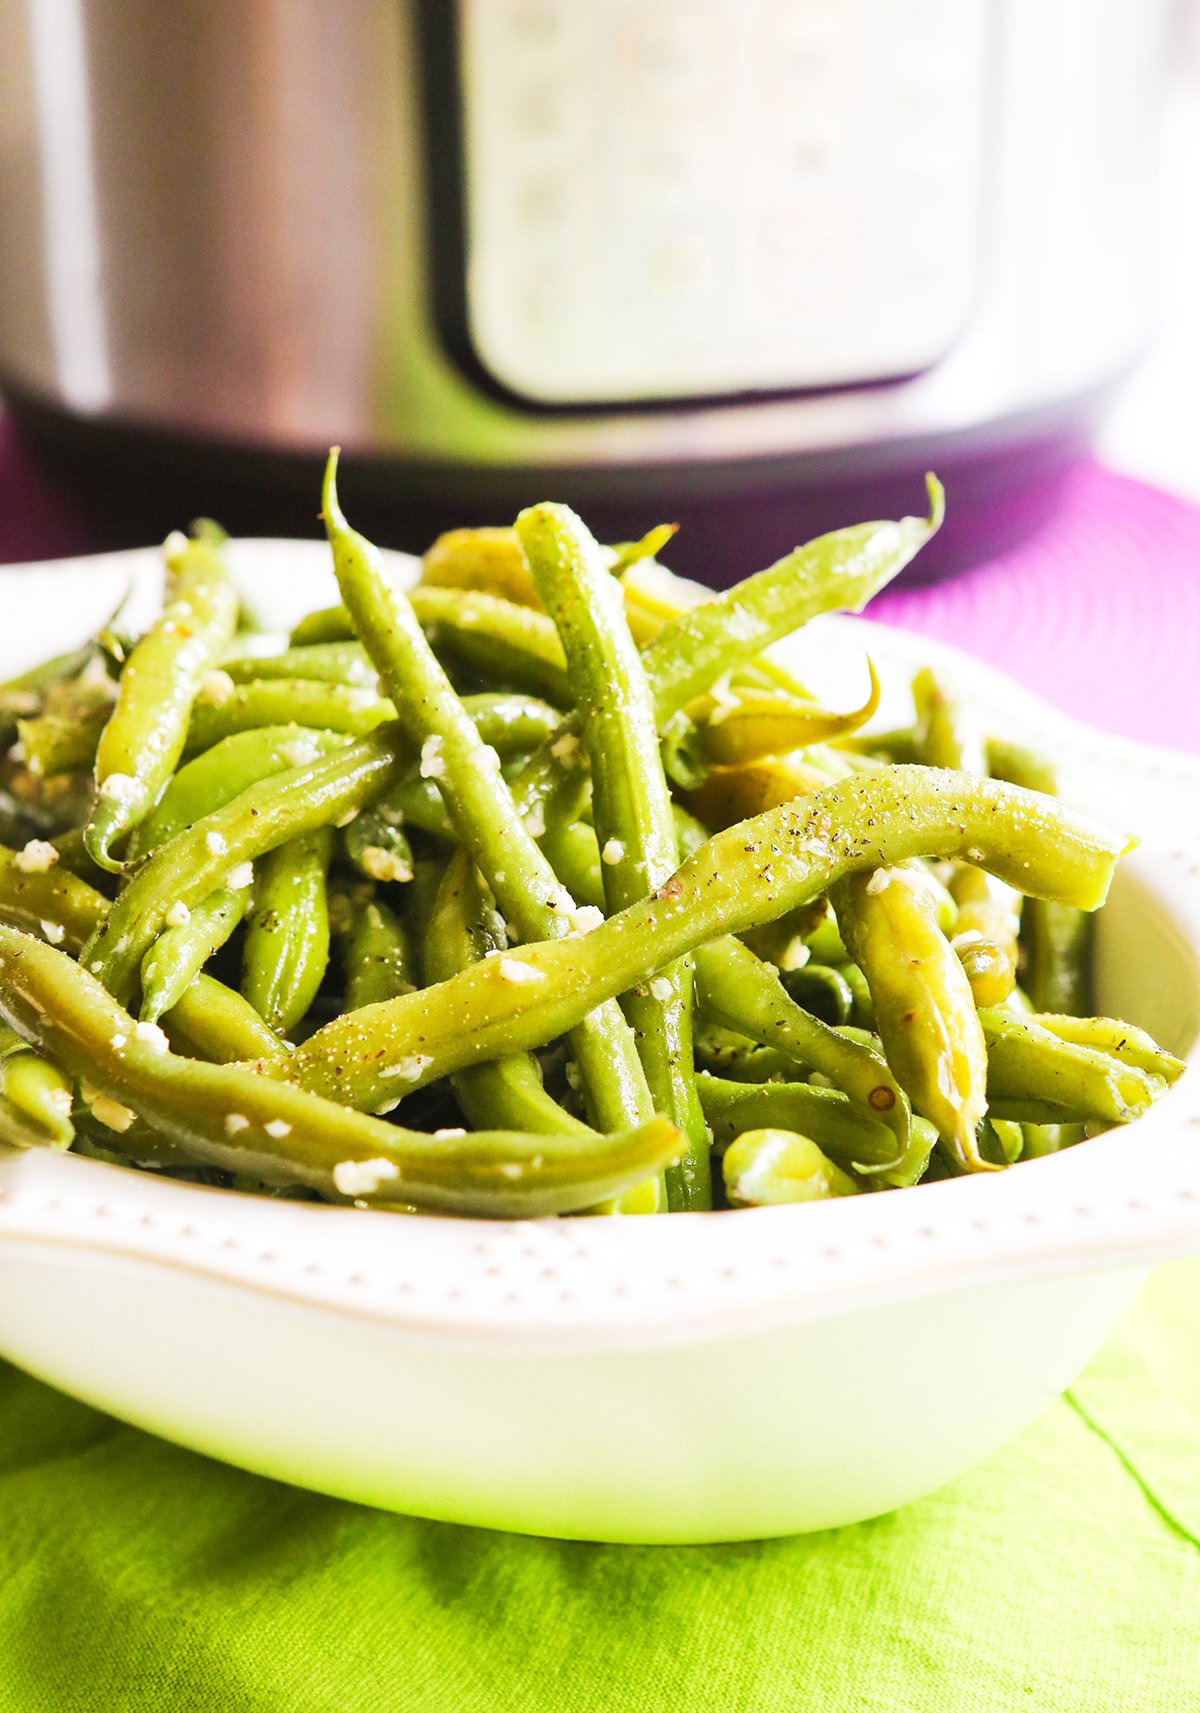 Steamed green beans prepared in the instant pot in a bowl.